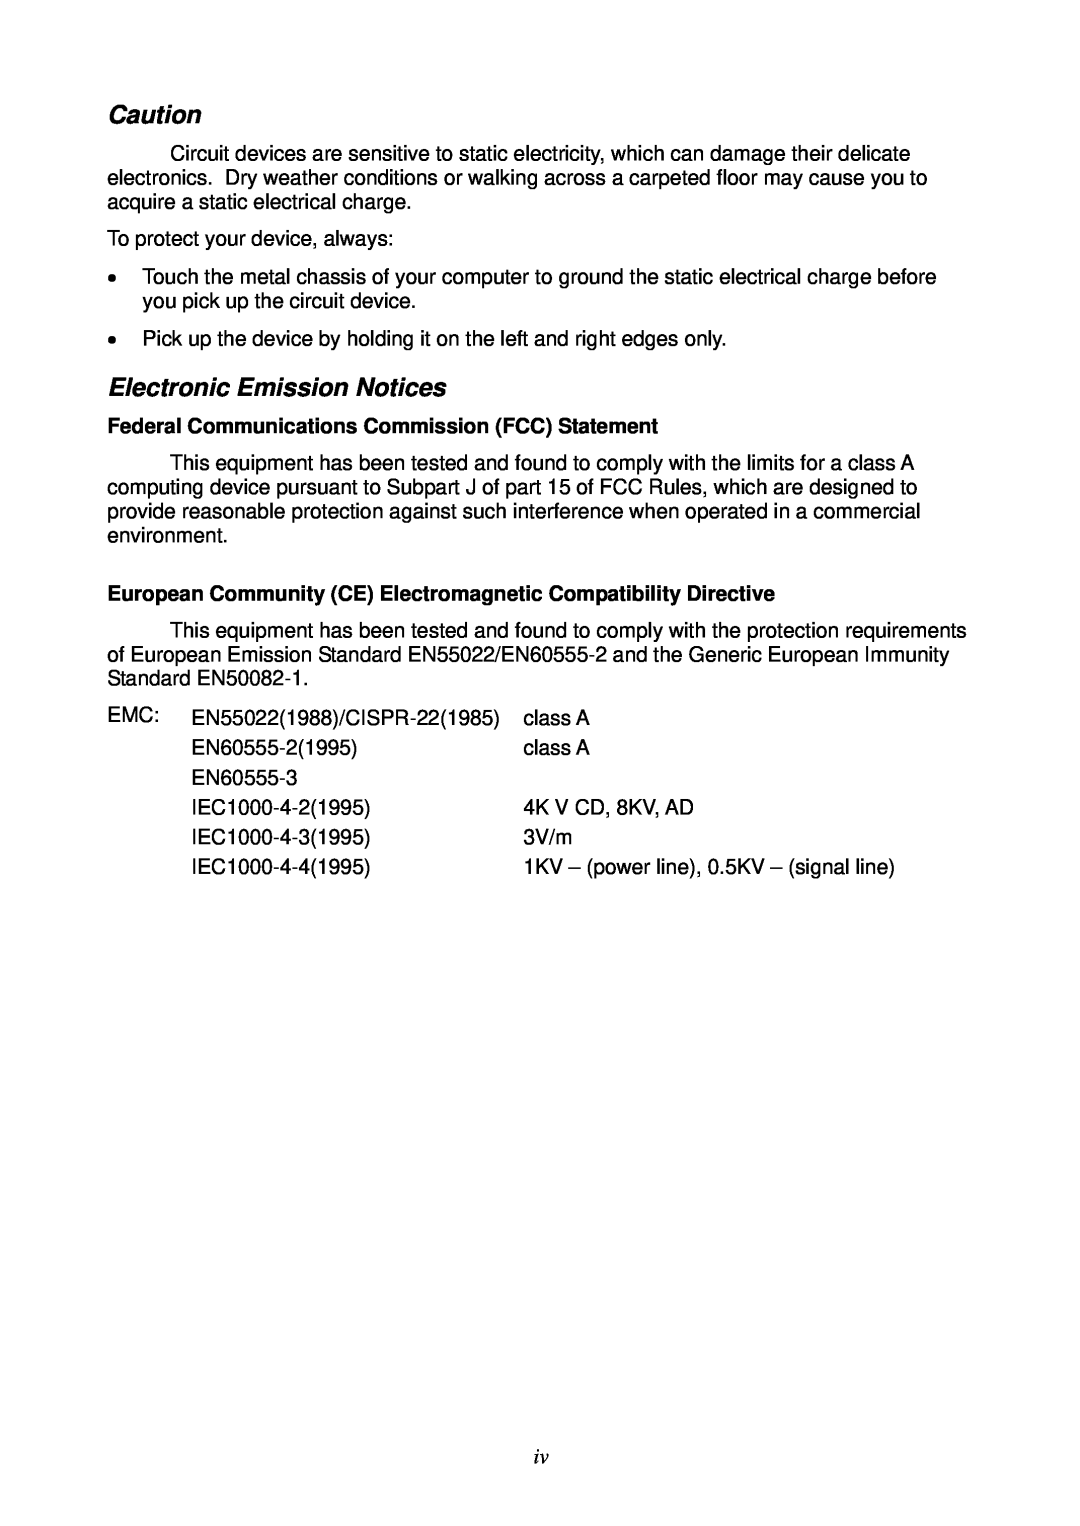 Edimax Technology ES-5224RS+ user manual Electronic Emission Notices, Federal Communications Commission FCC Statement 